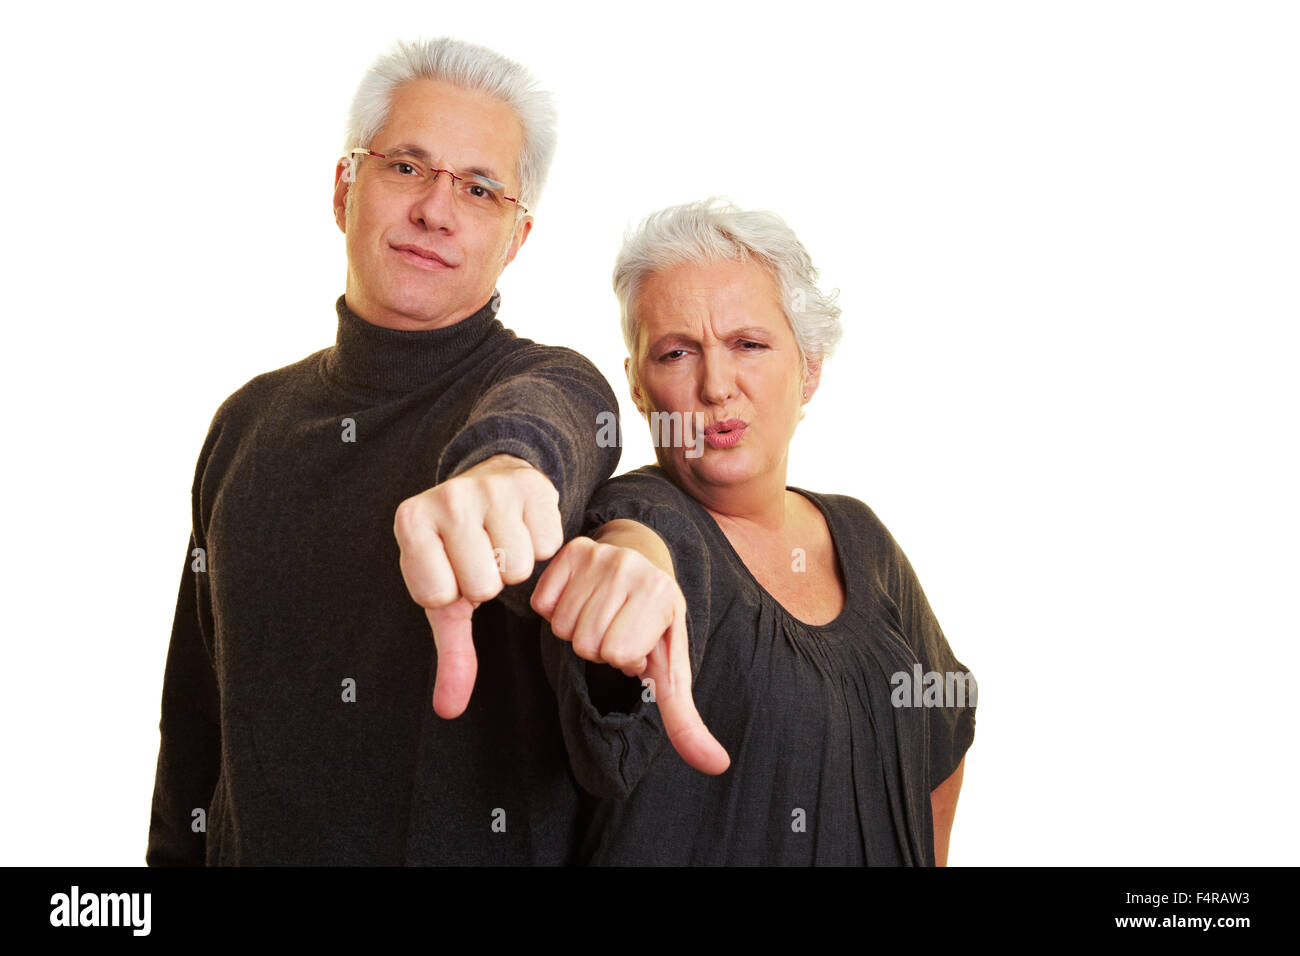 Two dissappointed senior citizens holding their thumbs down Stock Photo